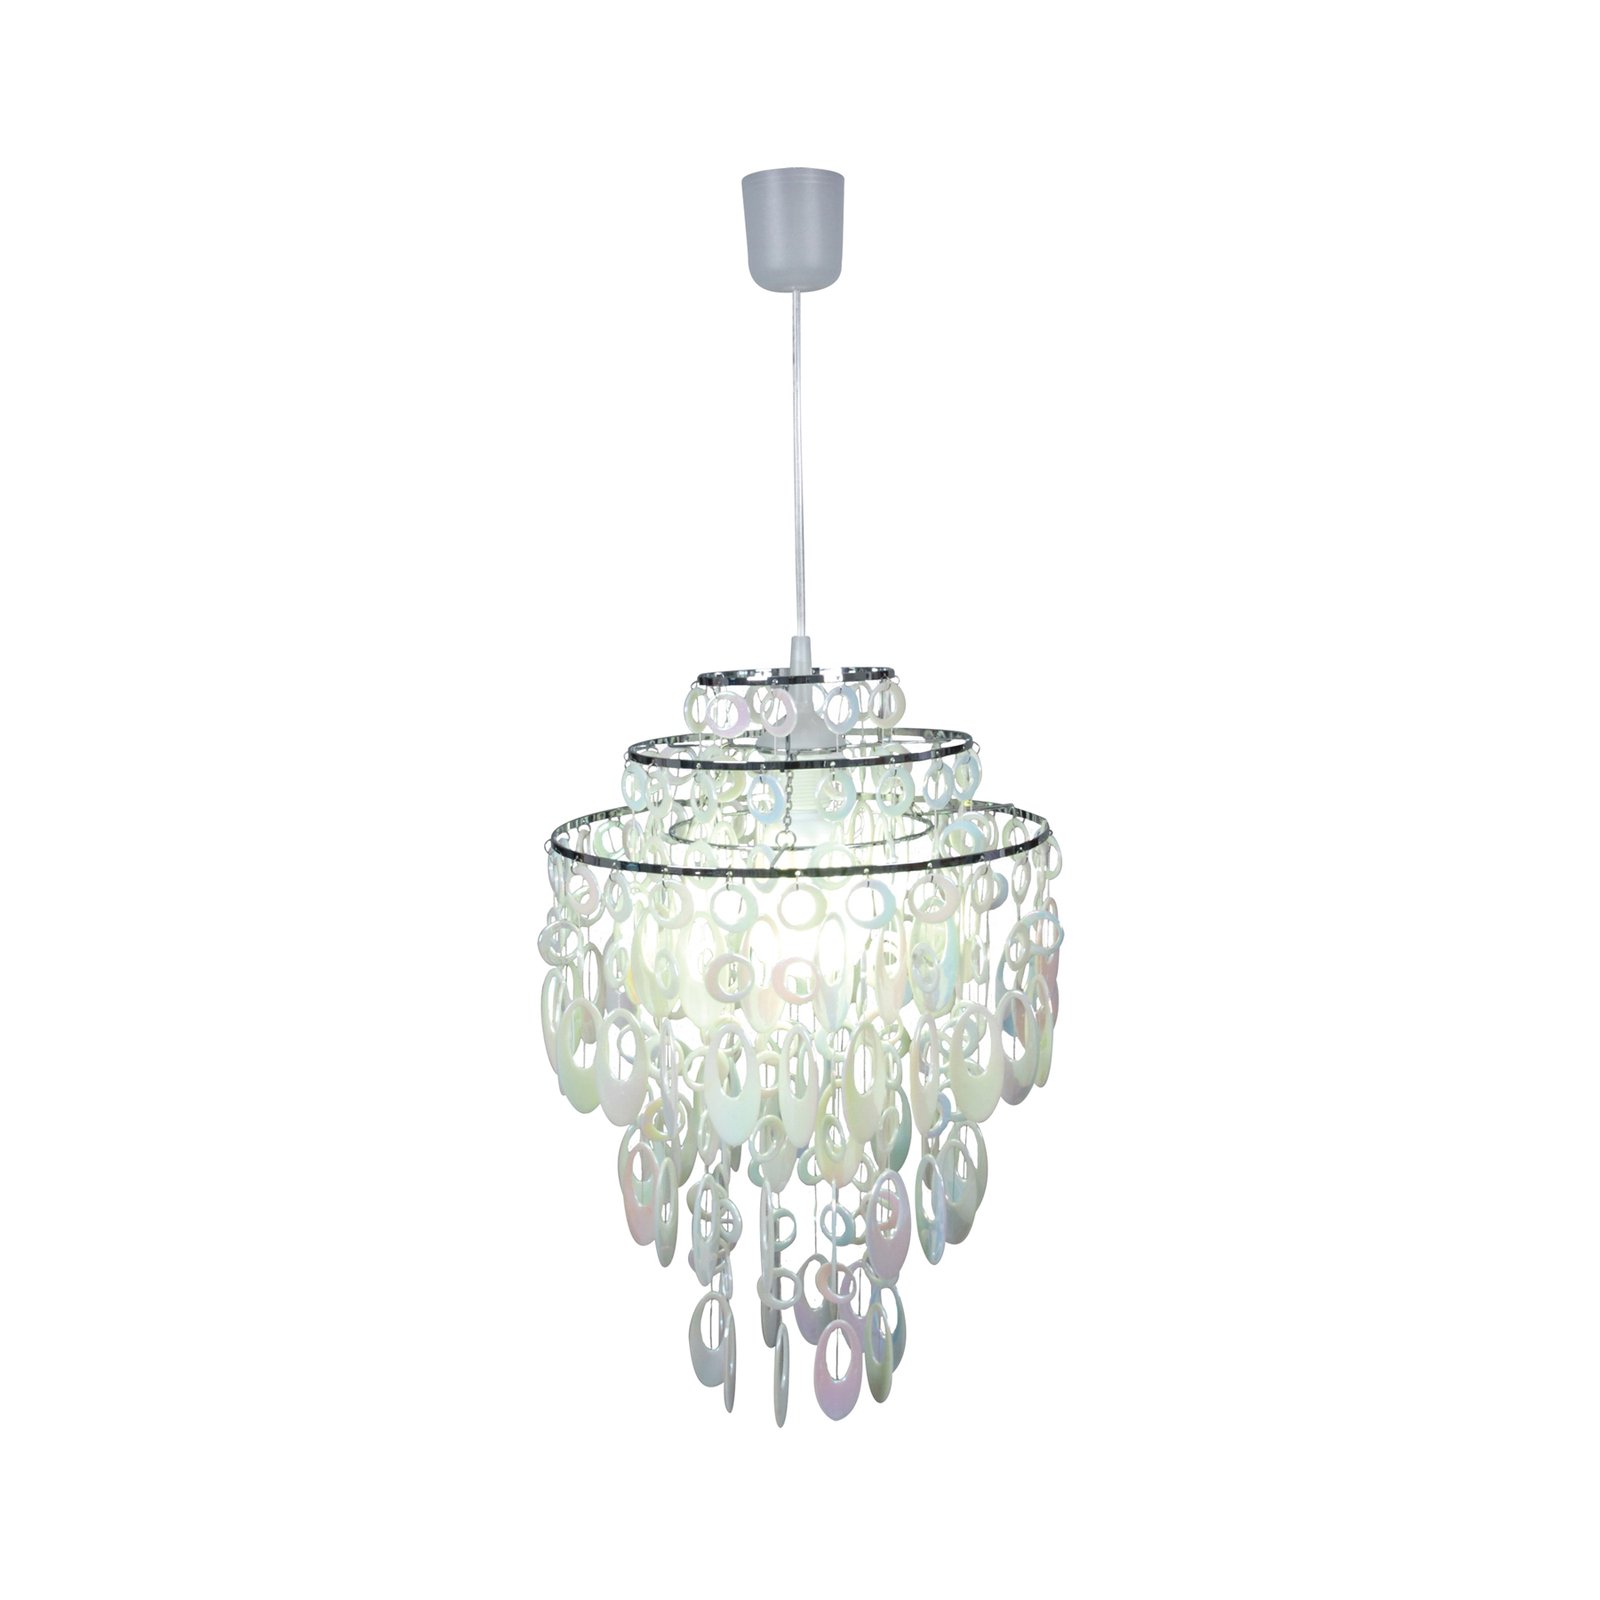 Lina pendant light, acrylic, mother-of-pearl